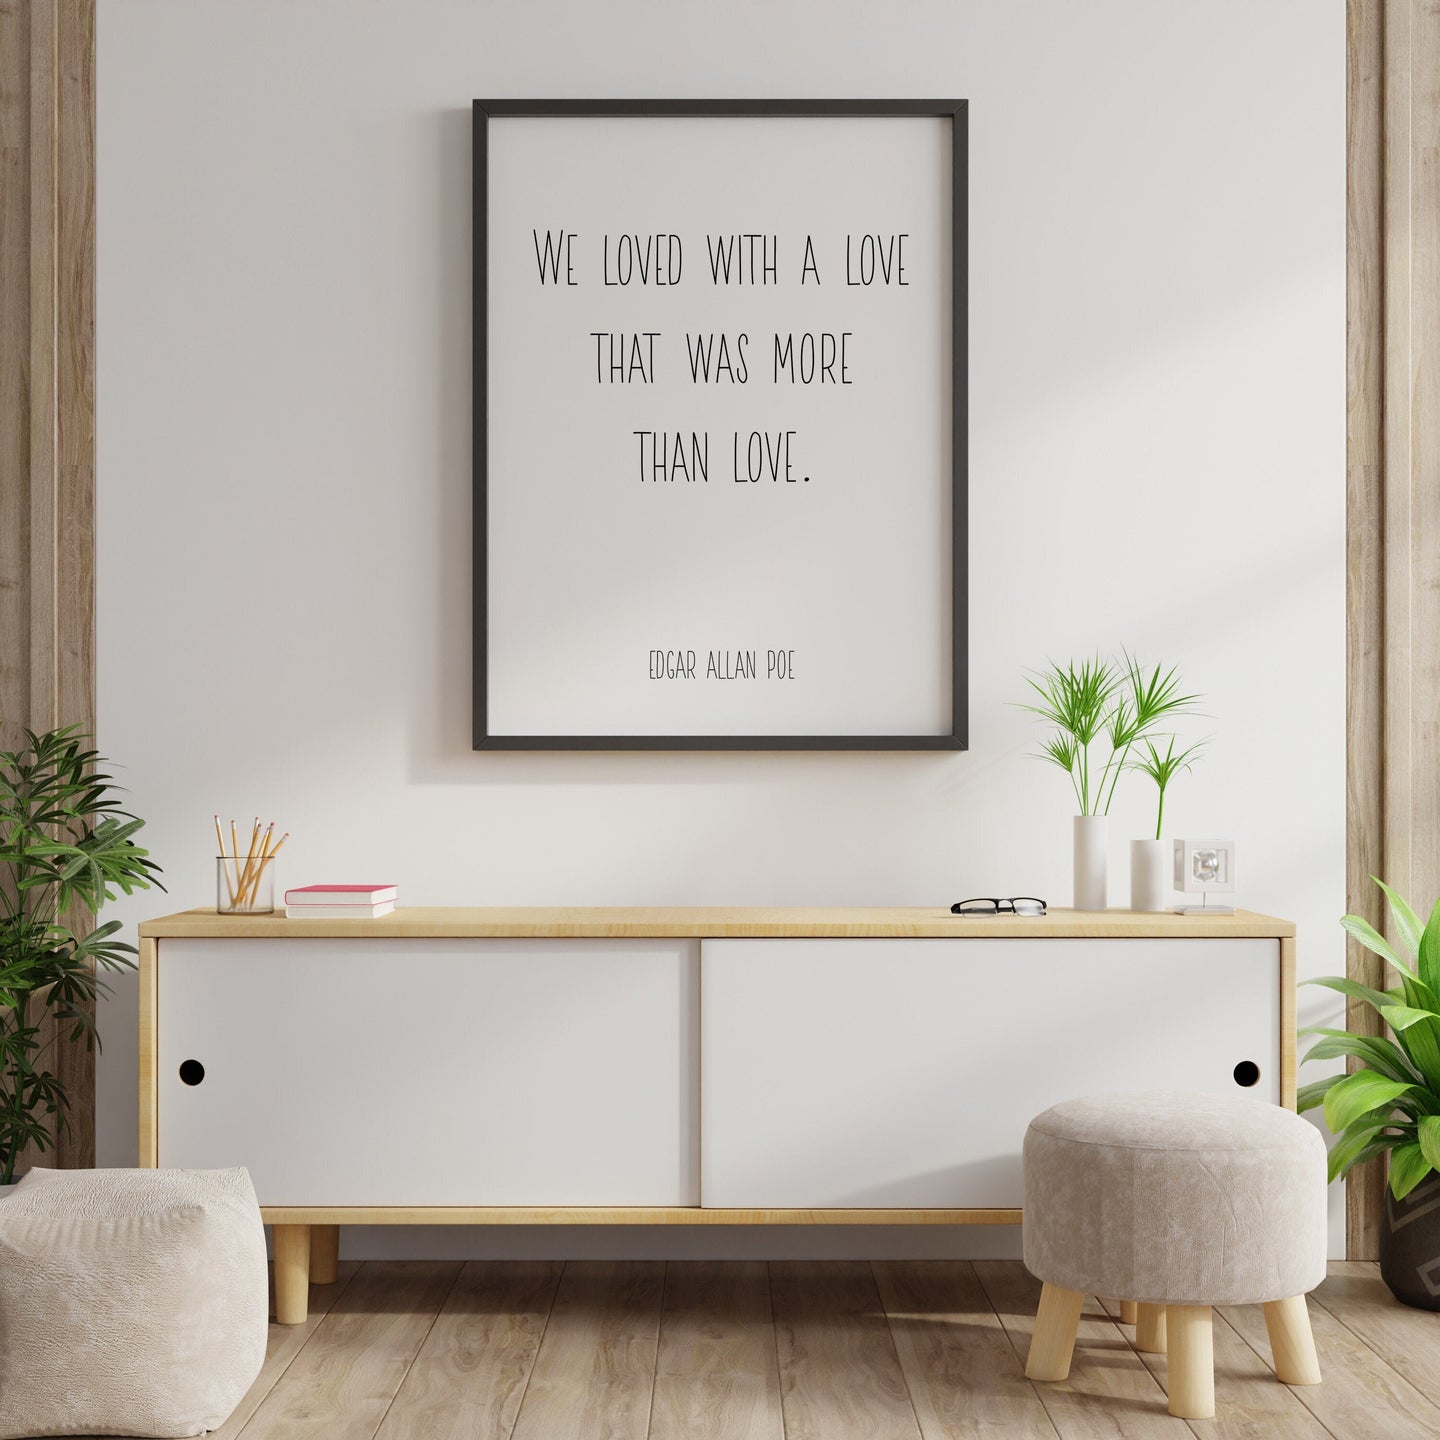 Edgar Allan Poe Poem Annabel Lee Quote - We loved with a love that was more than love - Art Print for Home Decor - Physical Art Print